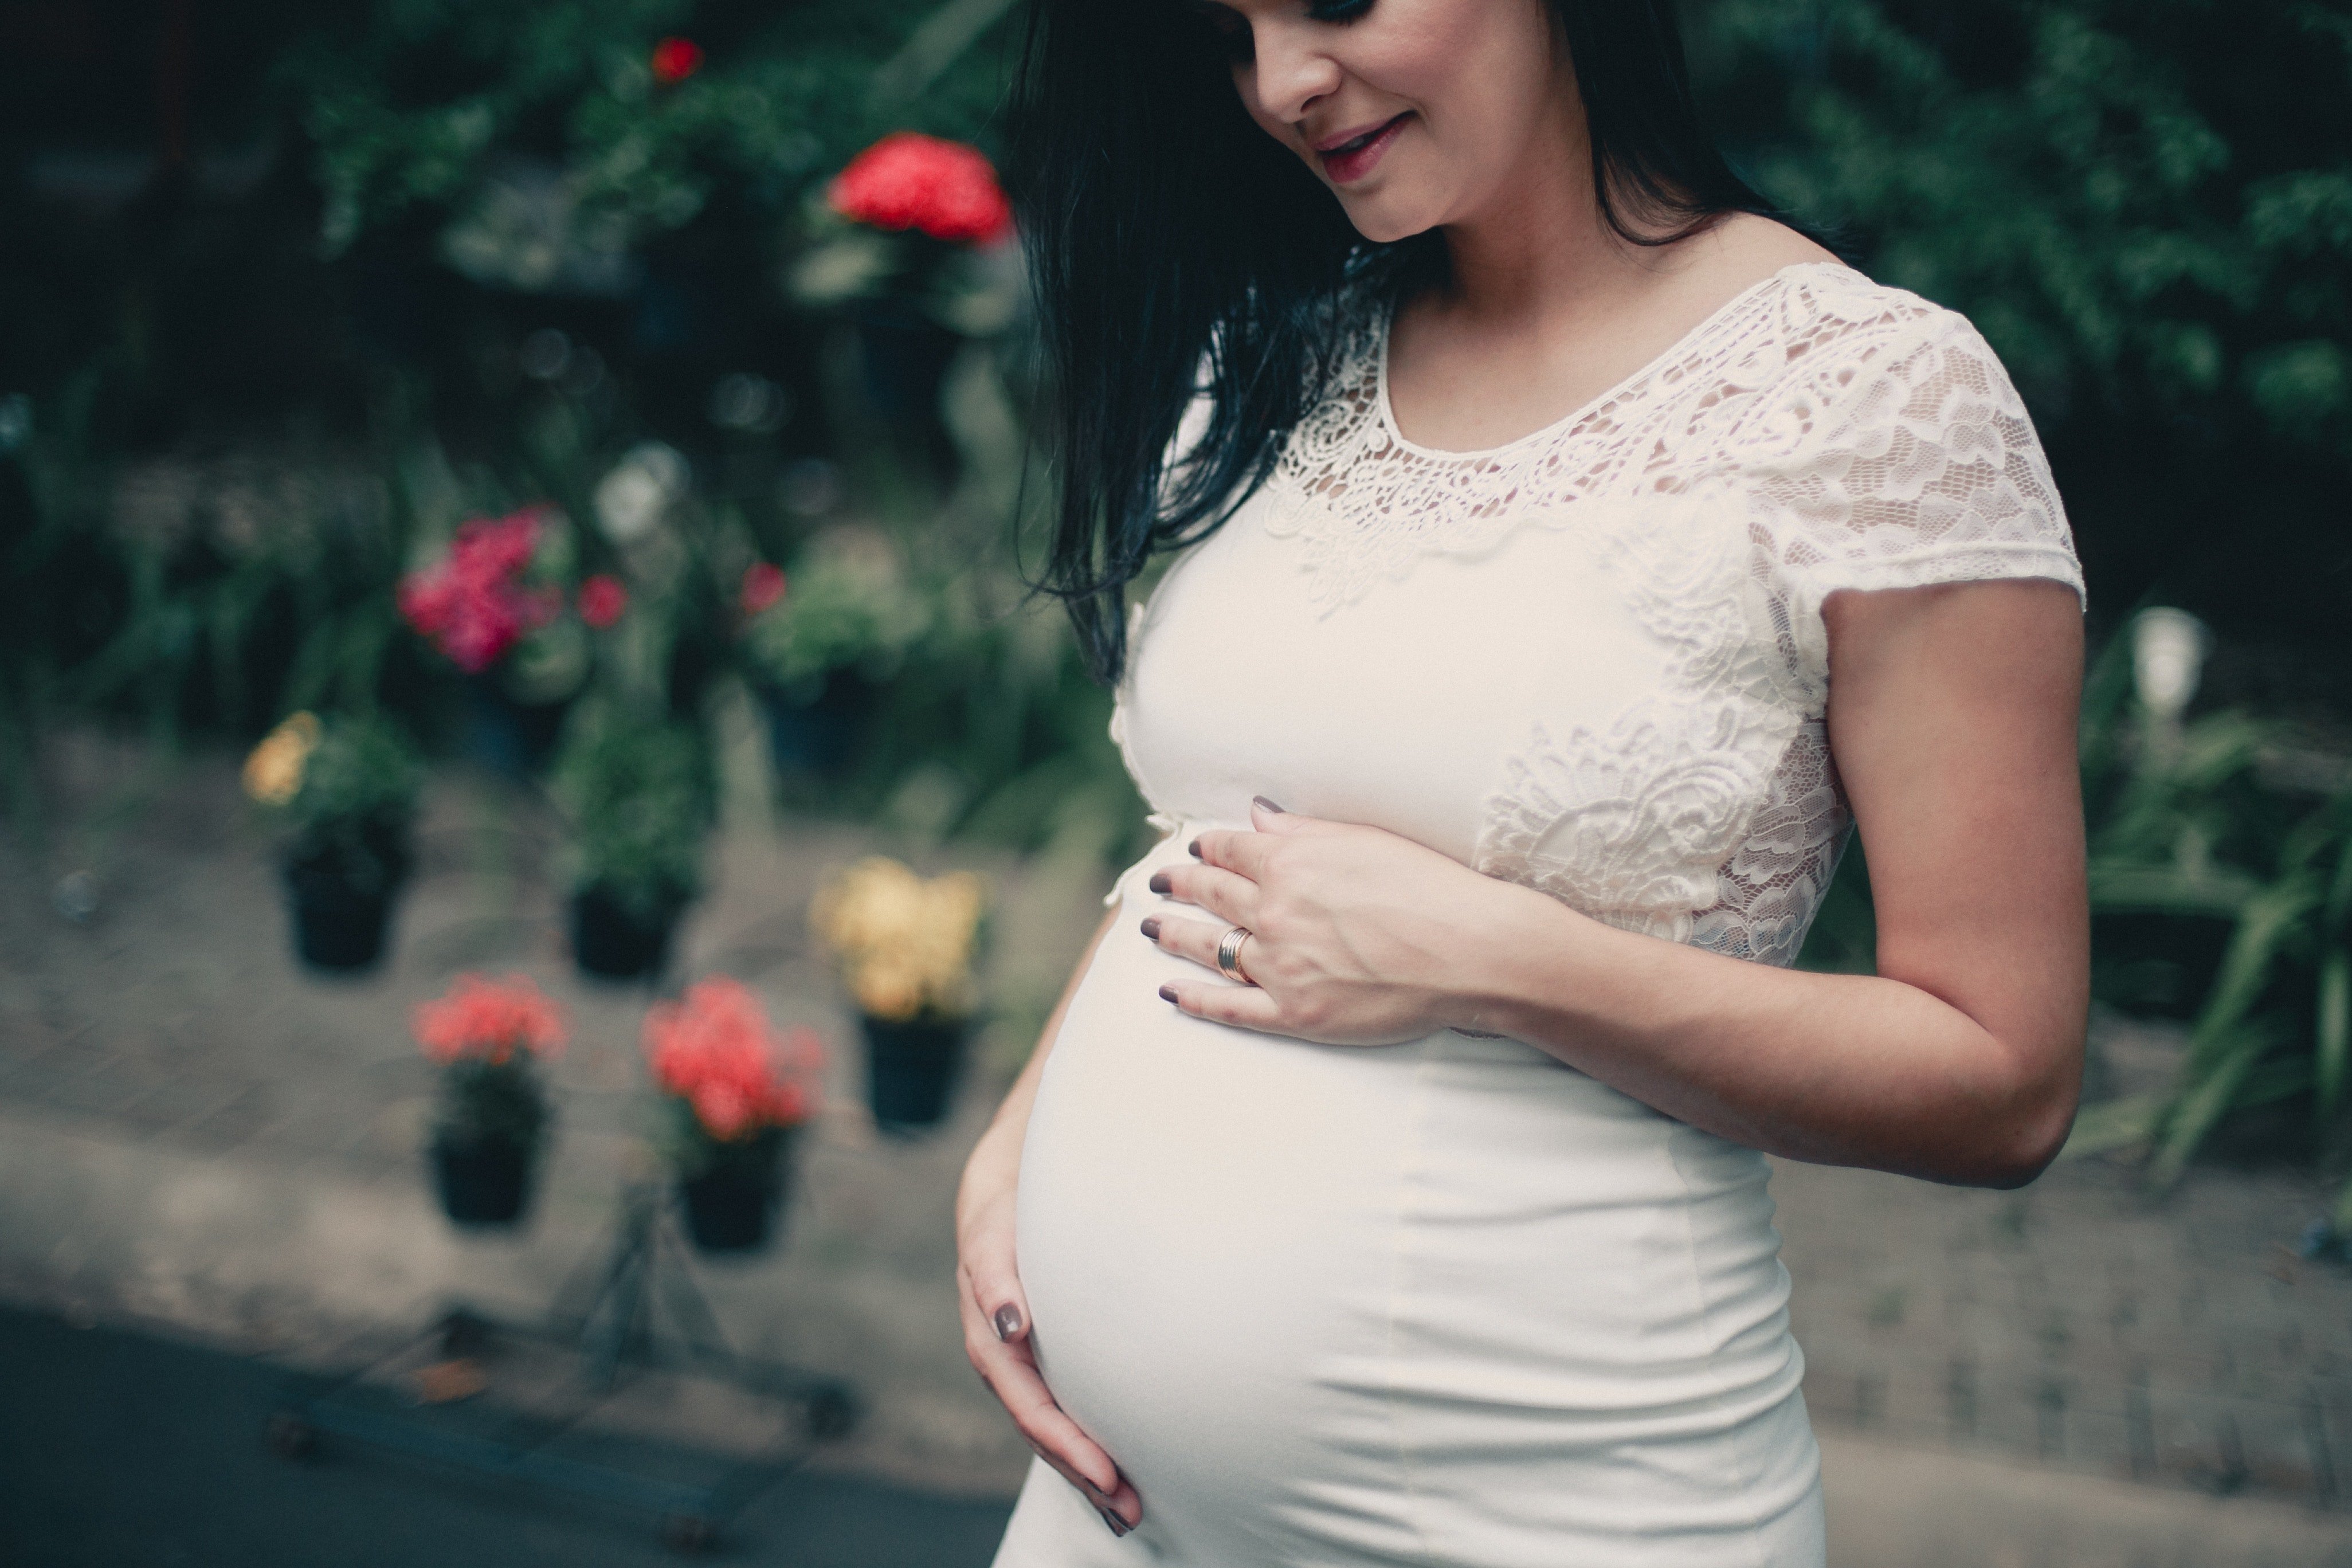 Close-up Photo of Pregnant Woman In White Dress Holding Her Stomach. | Source: Pexels